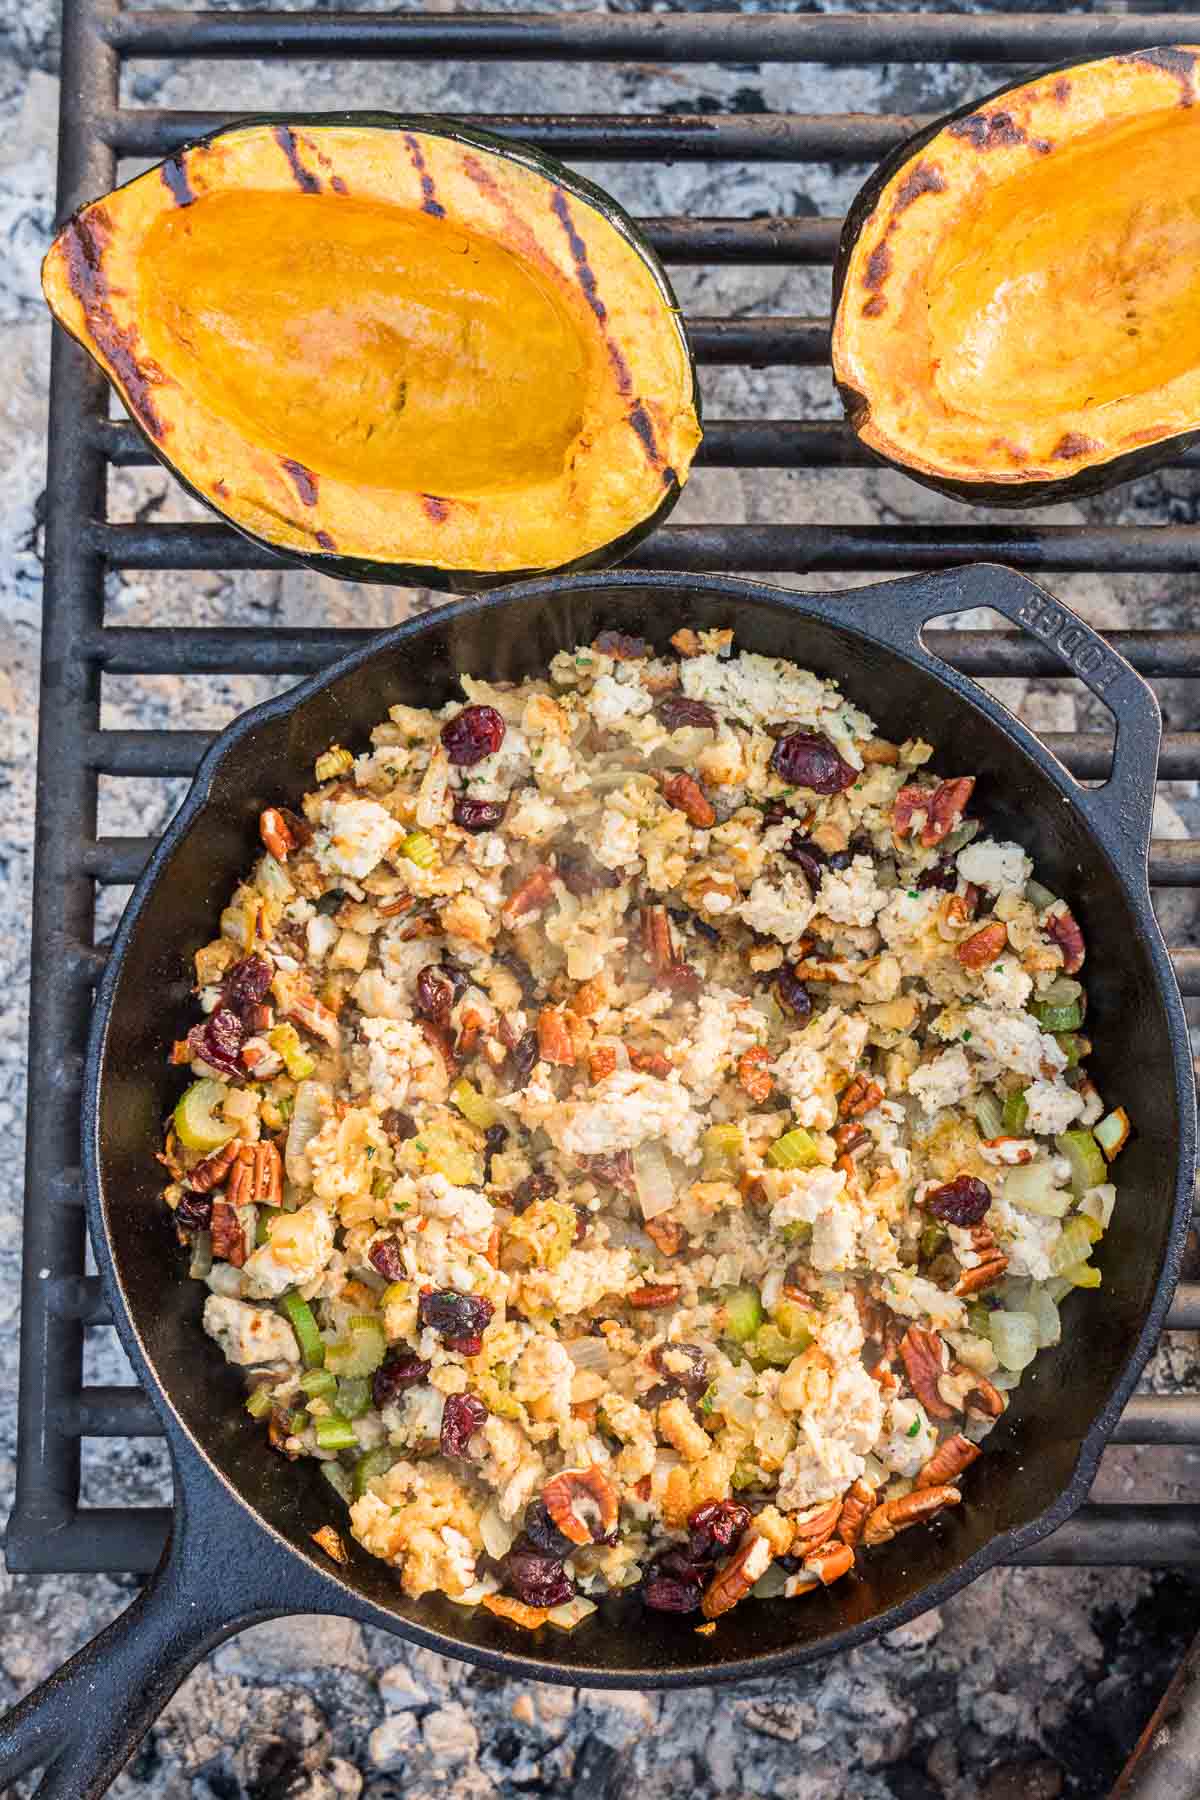 Stuffing in a cast iron skillet on a grill grate.